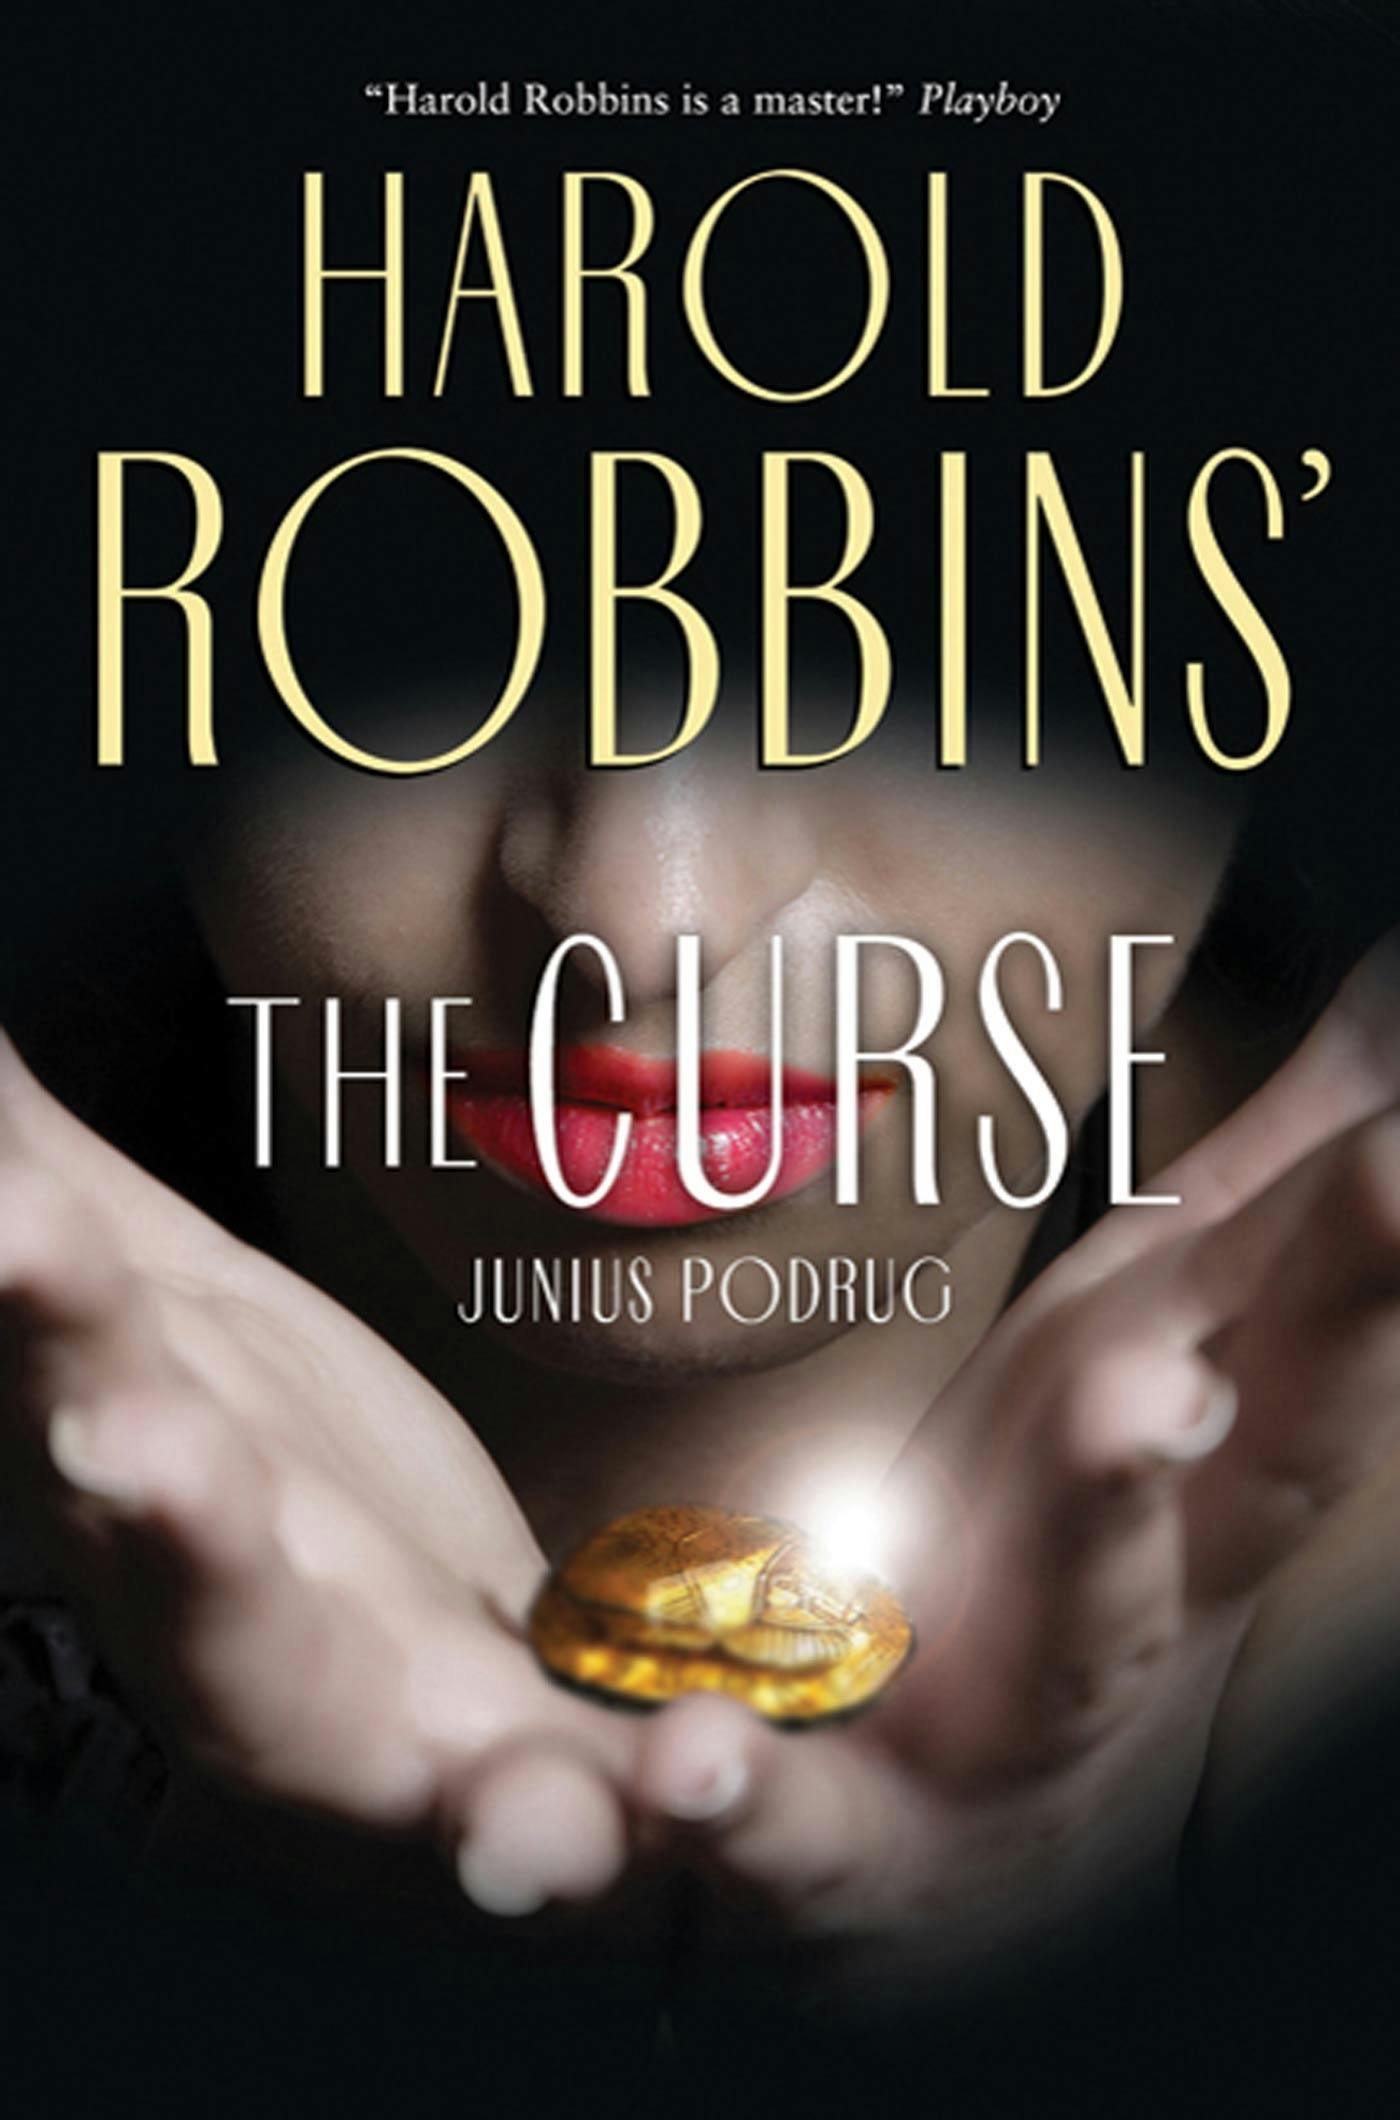 Cover for the book titled as: The Curse